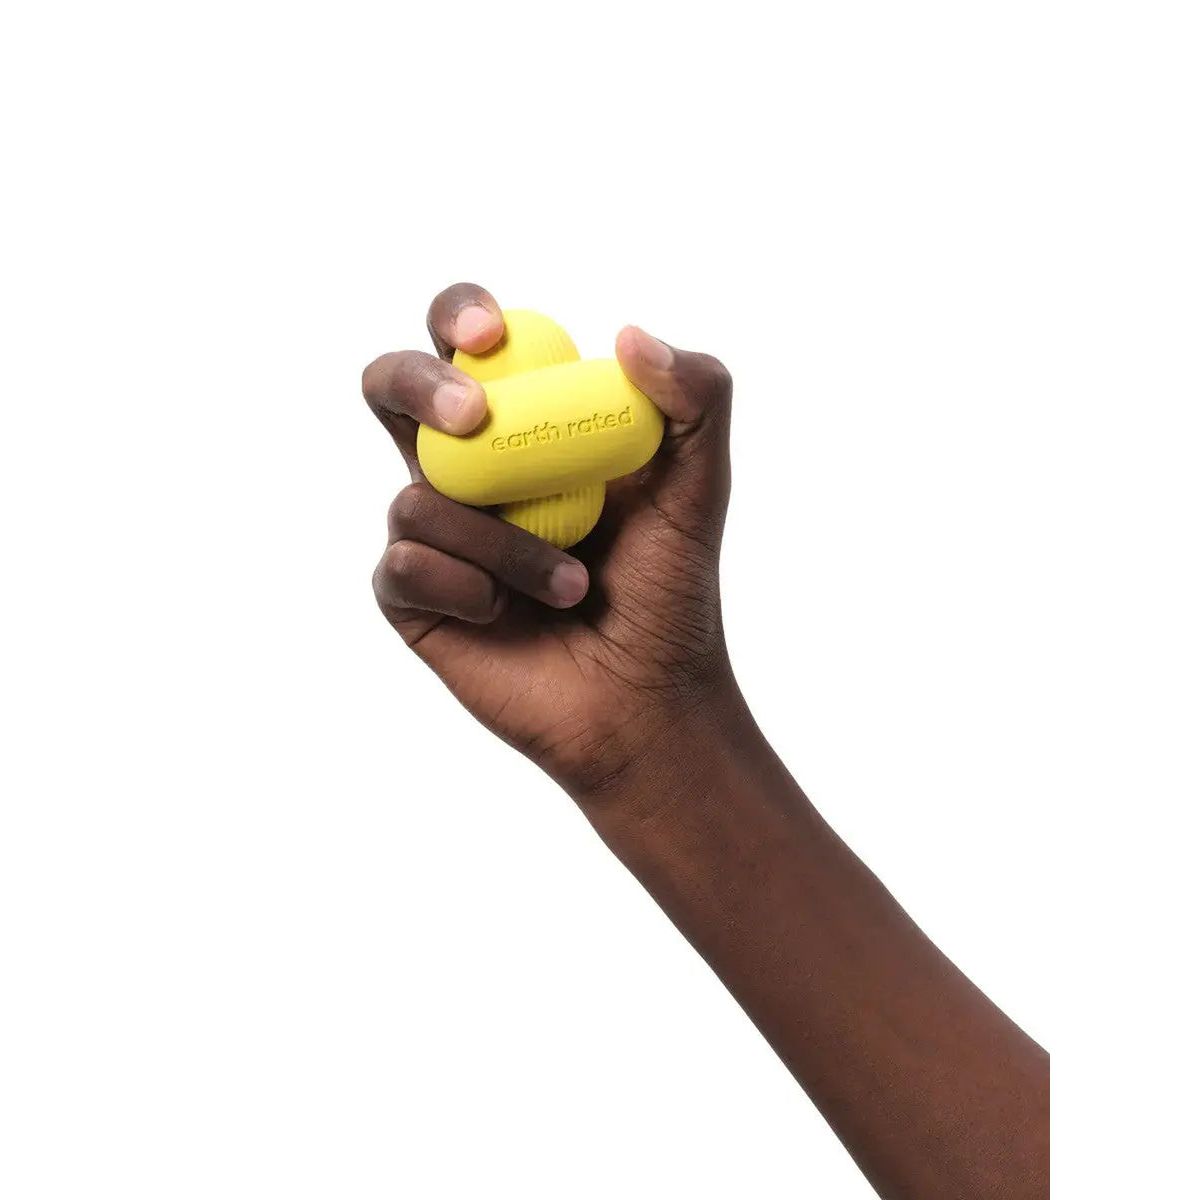 Earth Rated Dog Fetch Toy Yellow Rubber Earth Rated